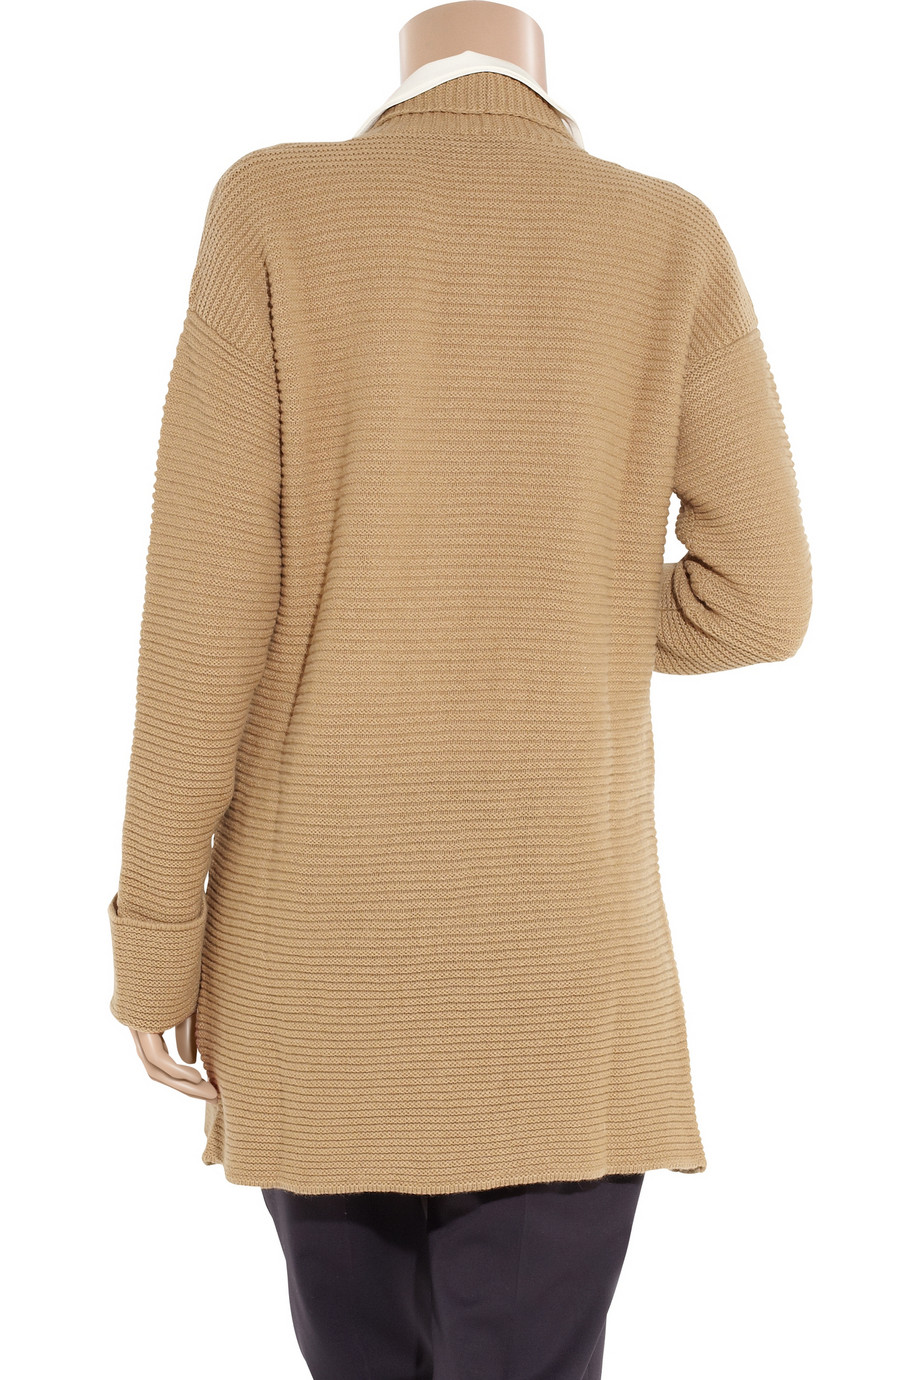 Jil Sander Ribbed Knitted Cashmere Cardi-coat in Brown (Natural) - Lyst